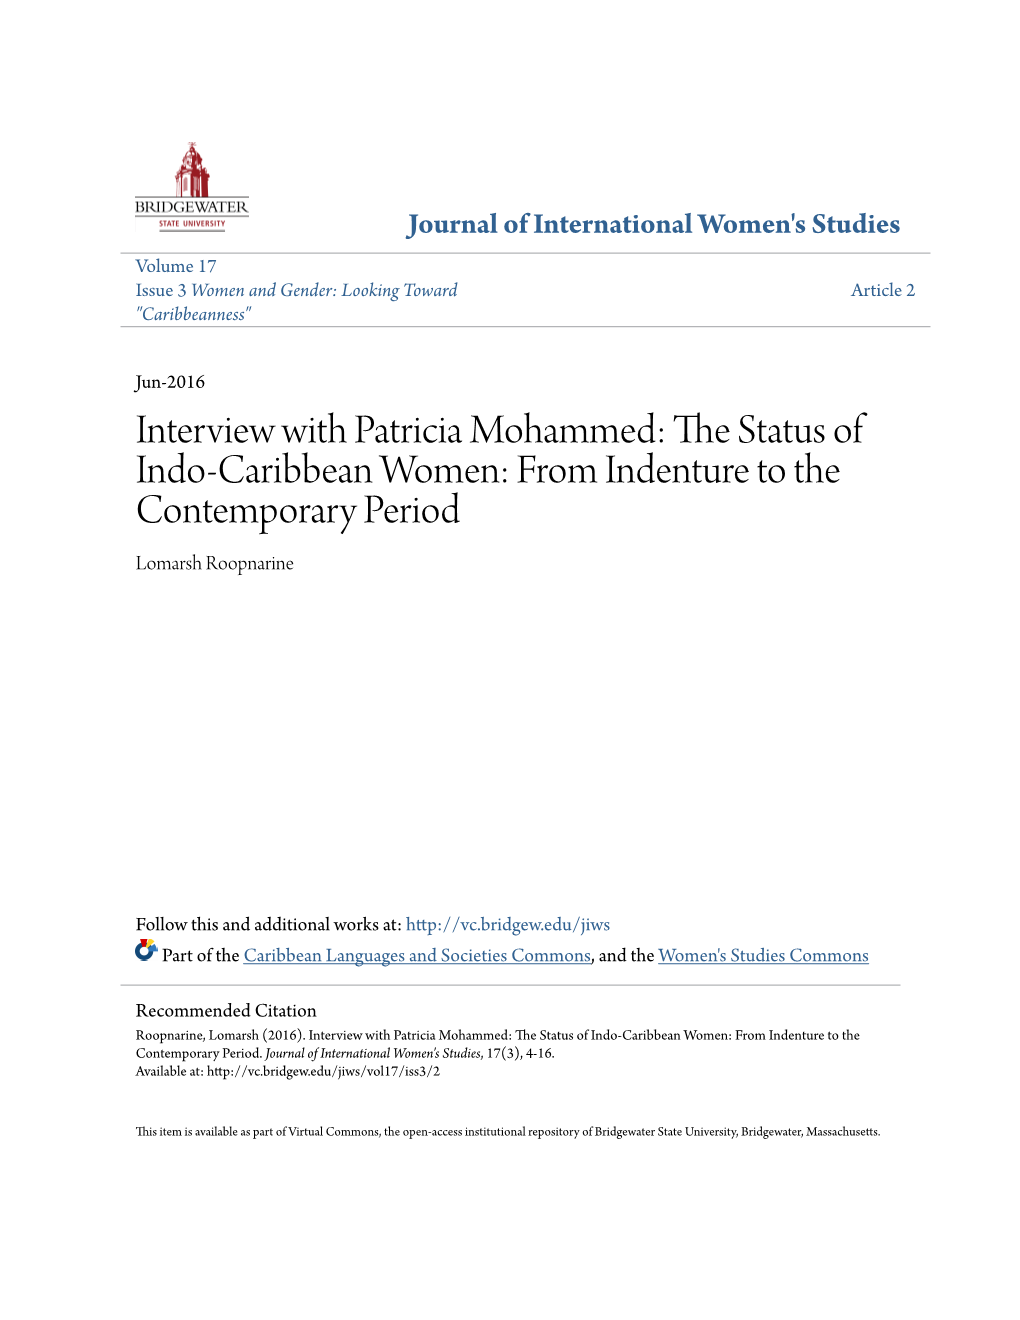 Interview with Patricia Mohammed: the Status of Indo-Caribbean Women: from Indenture to the Contemporary Period1